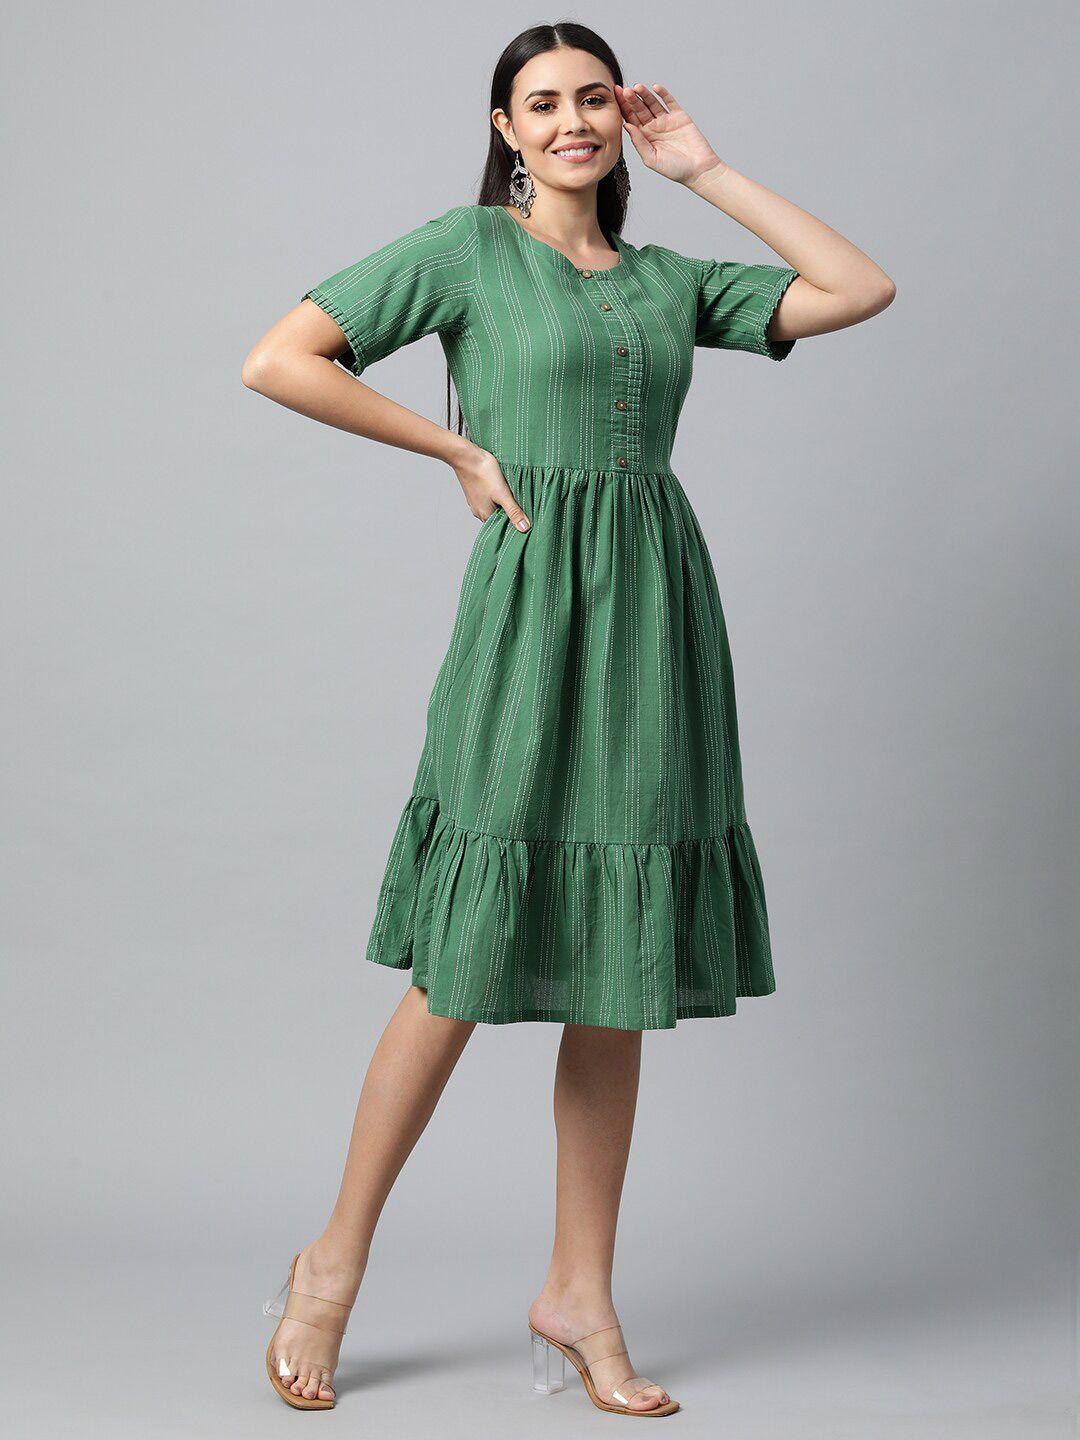 kami kubi green & white striped fit and flare dress